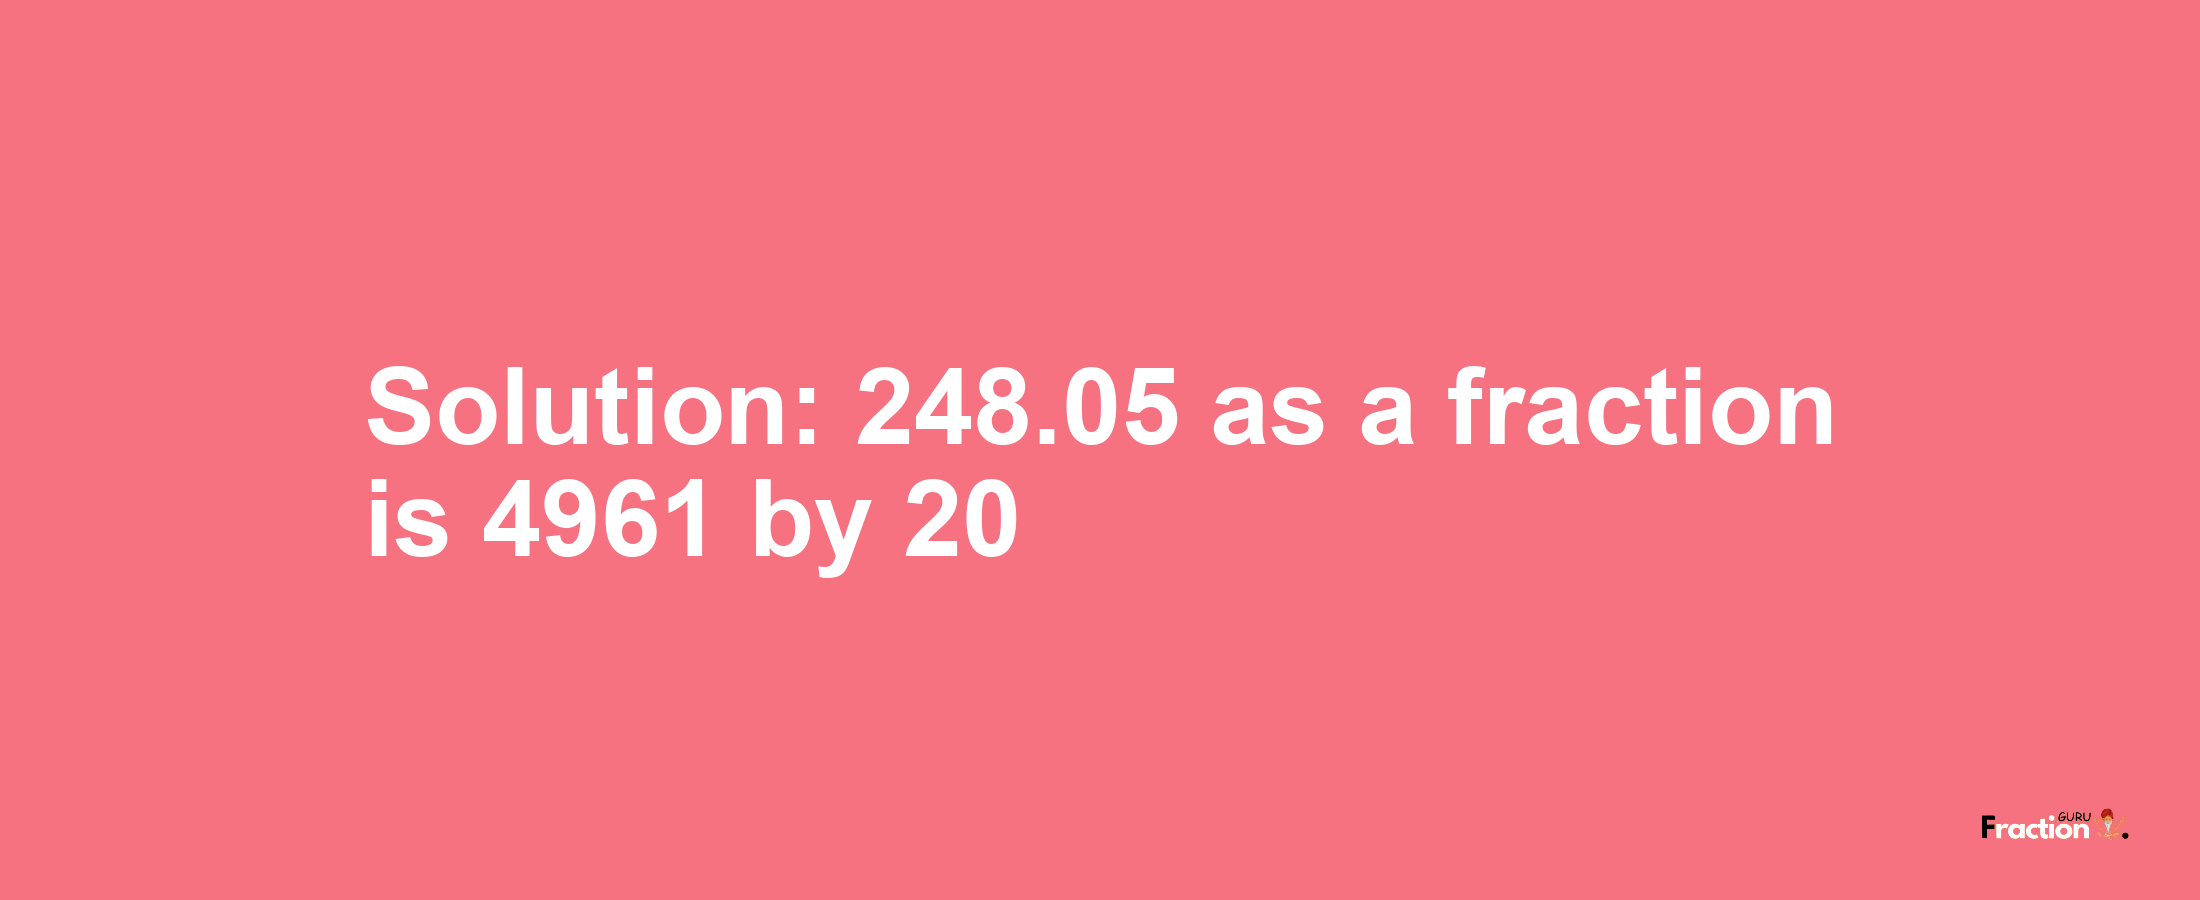 Solution:248.05 as a fraction is 4961/20